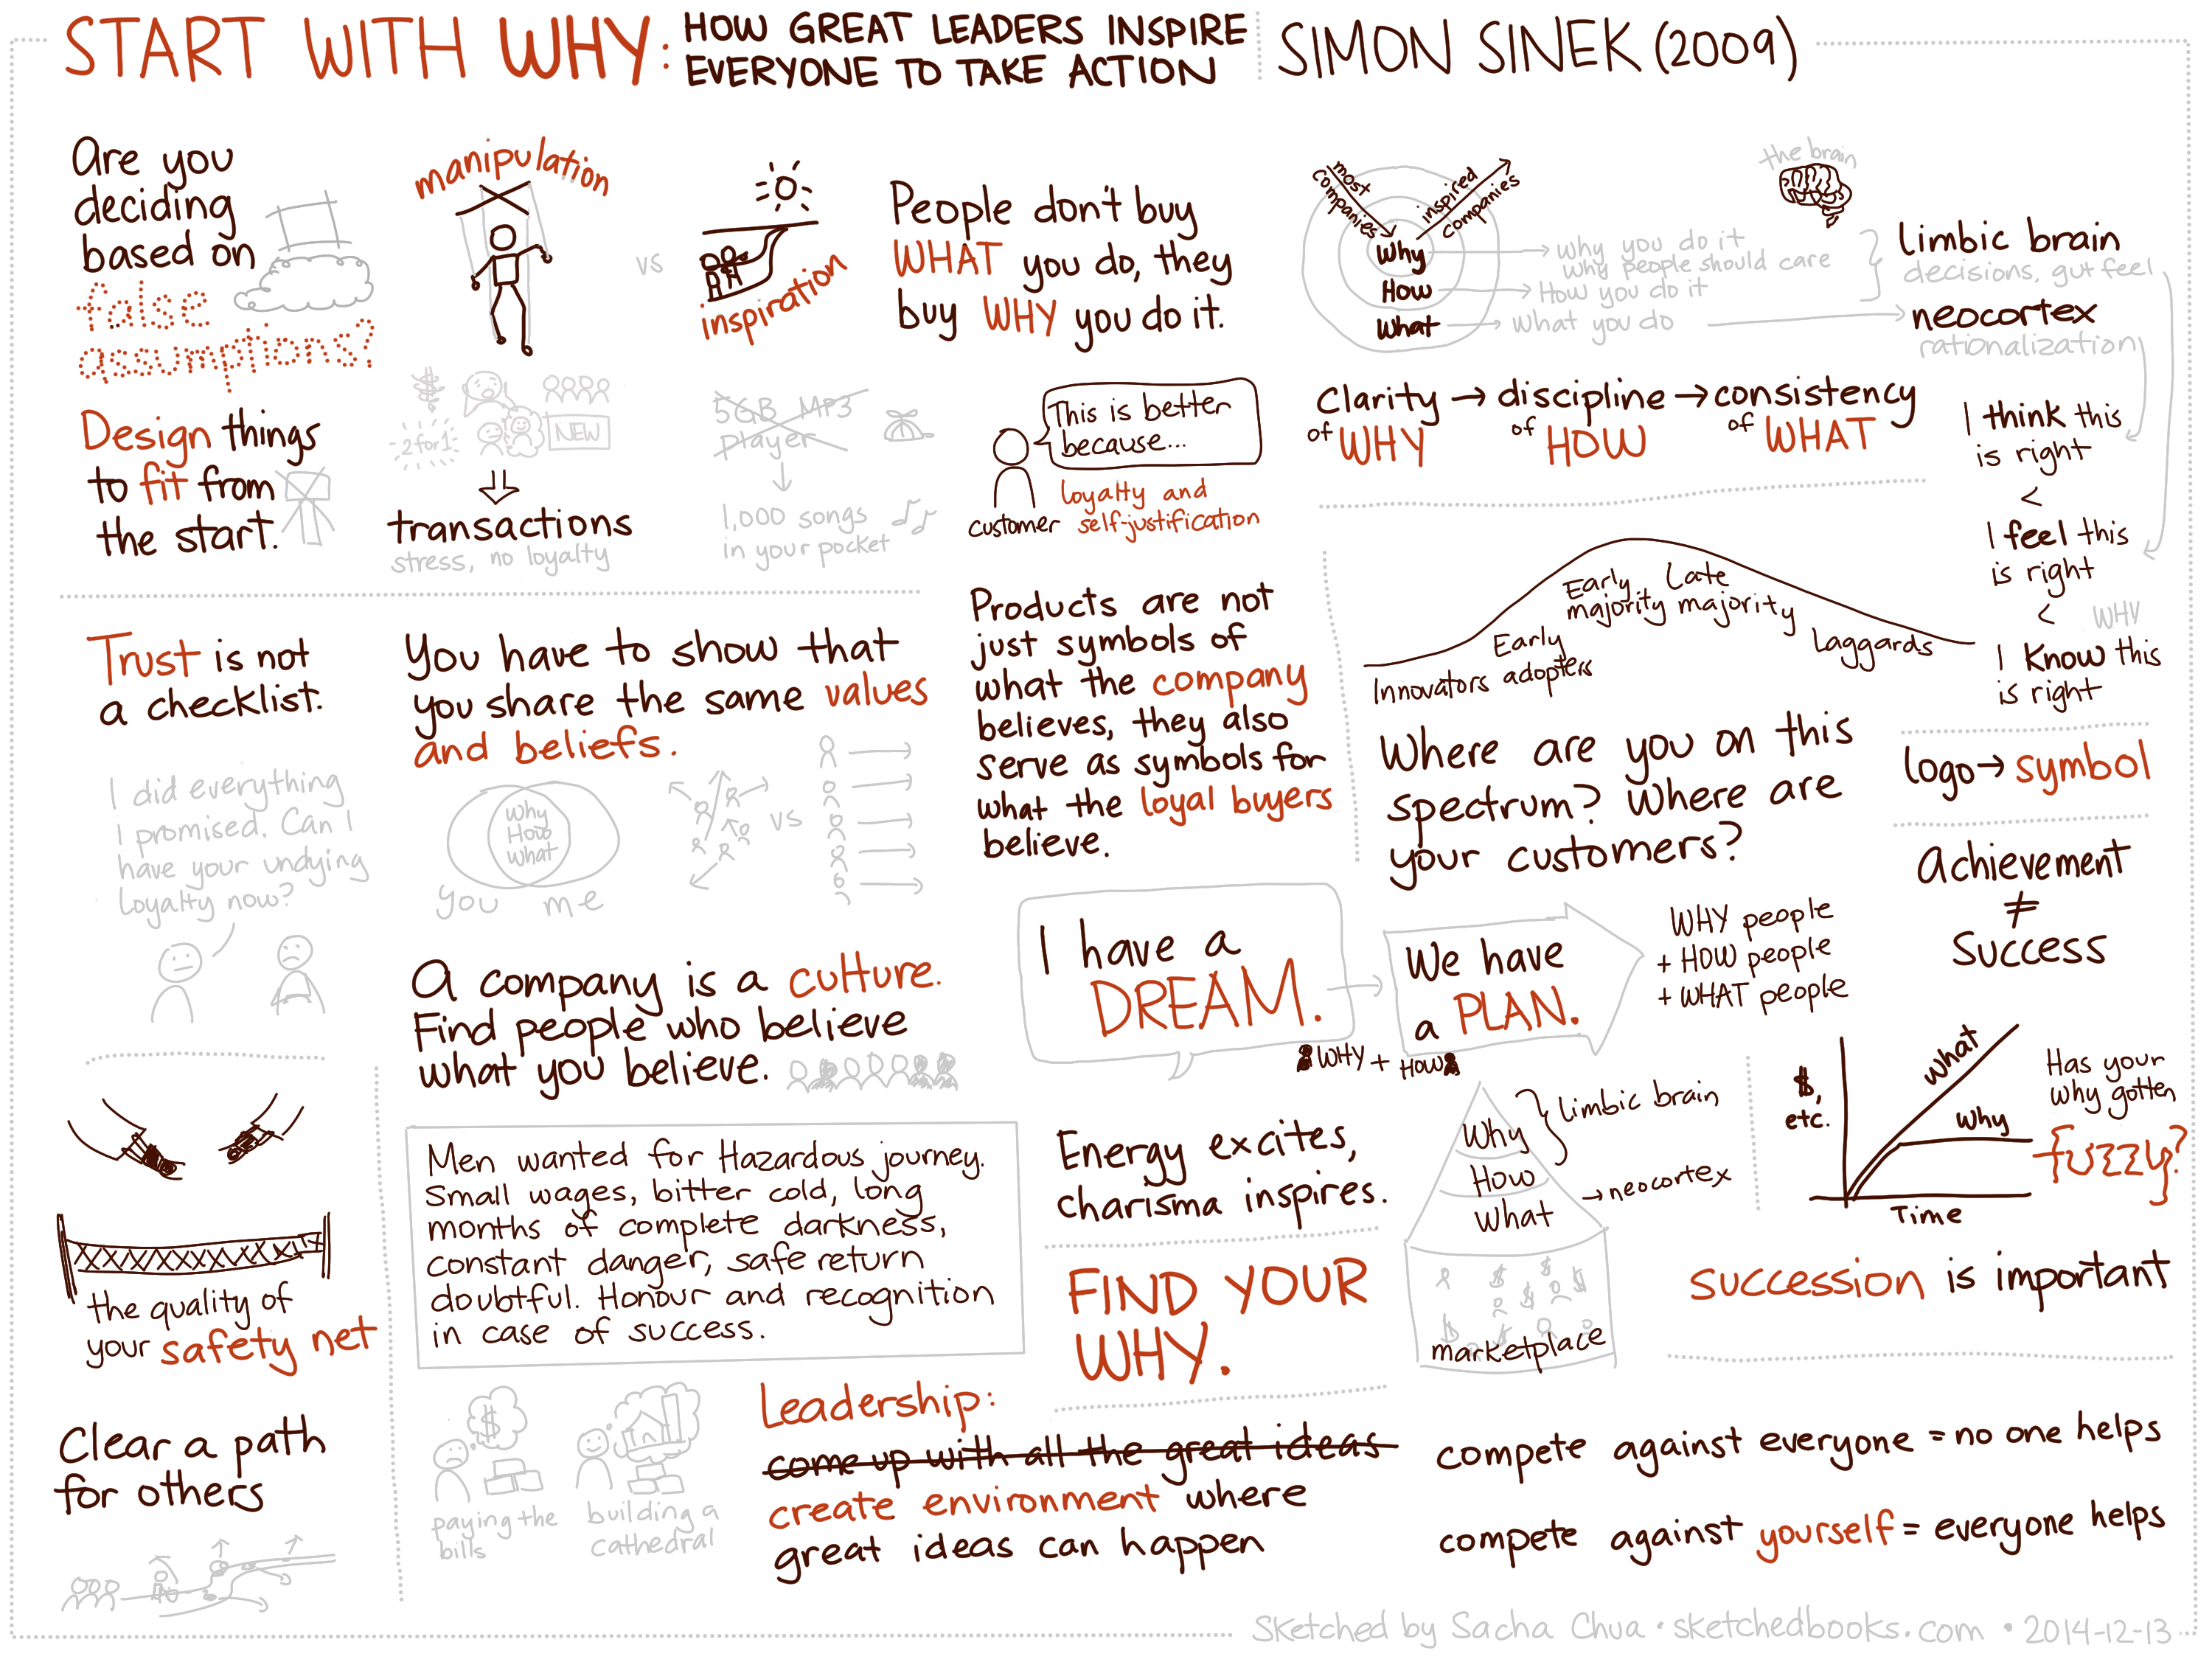 2014-12-13 Sketched Book - Start With Why - Simon Sinek